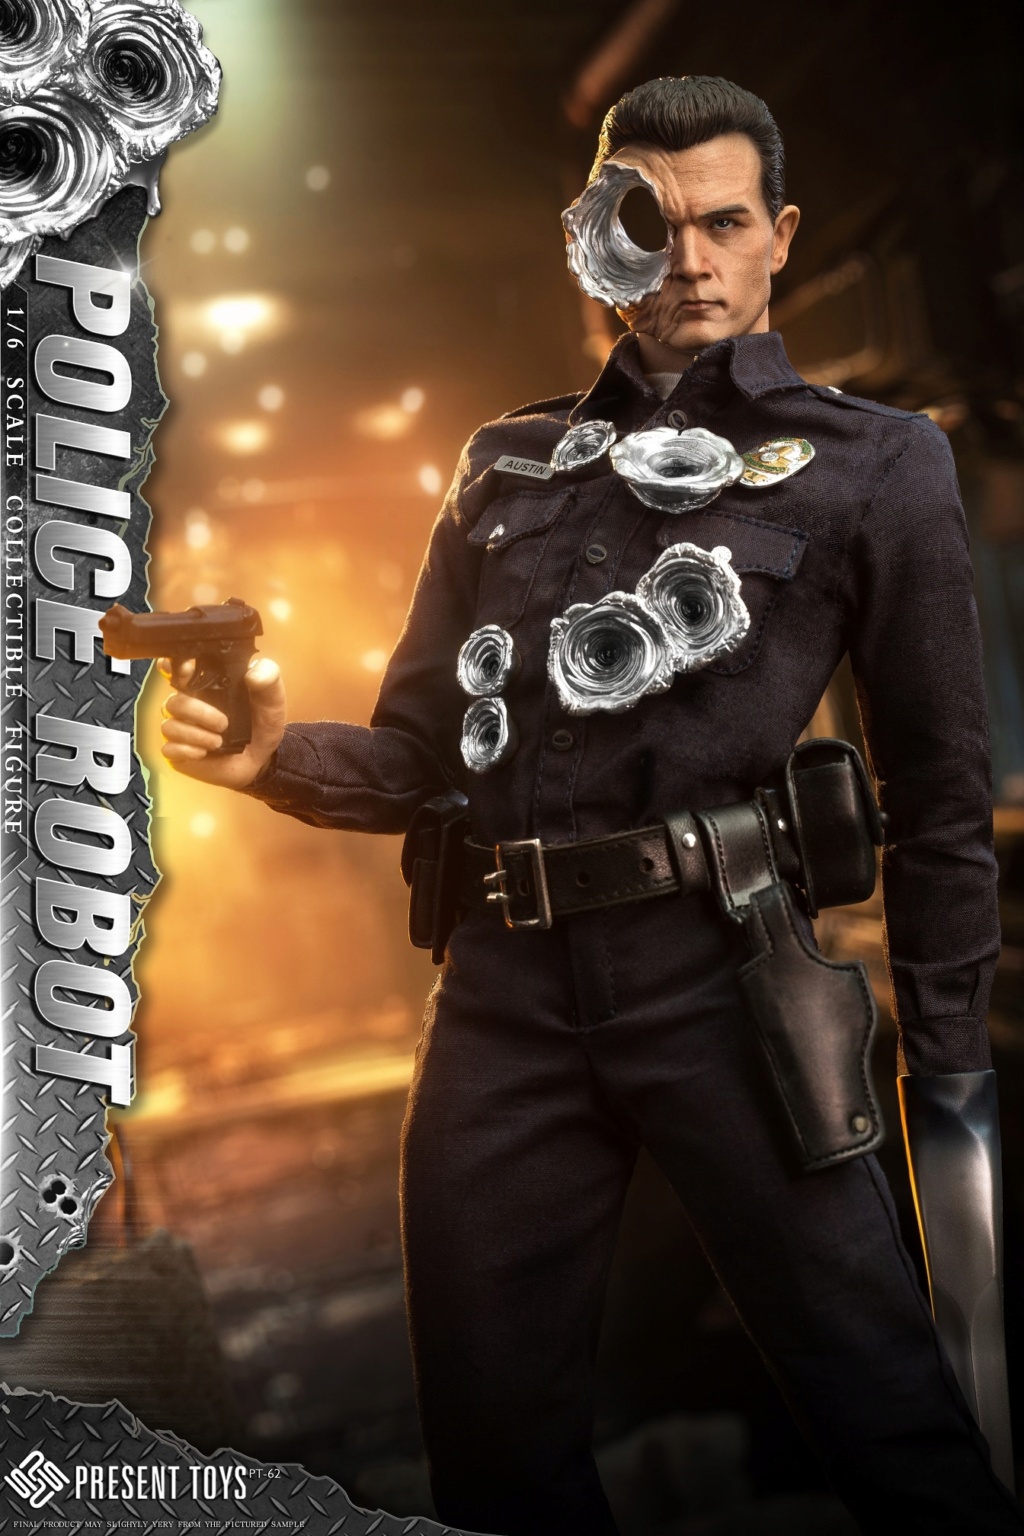 NEW PRODUCT: Present Toys: 1/6 Robot Police T1000 Action Figure #PT-sp62 14542510